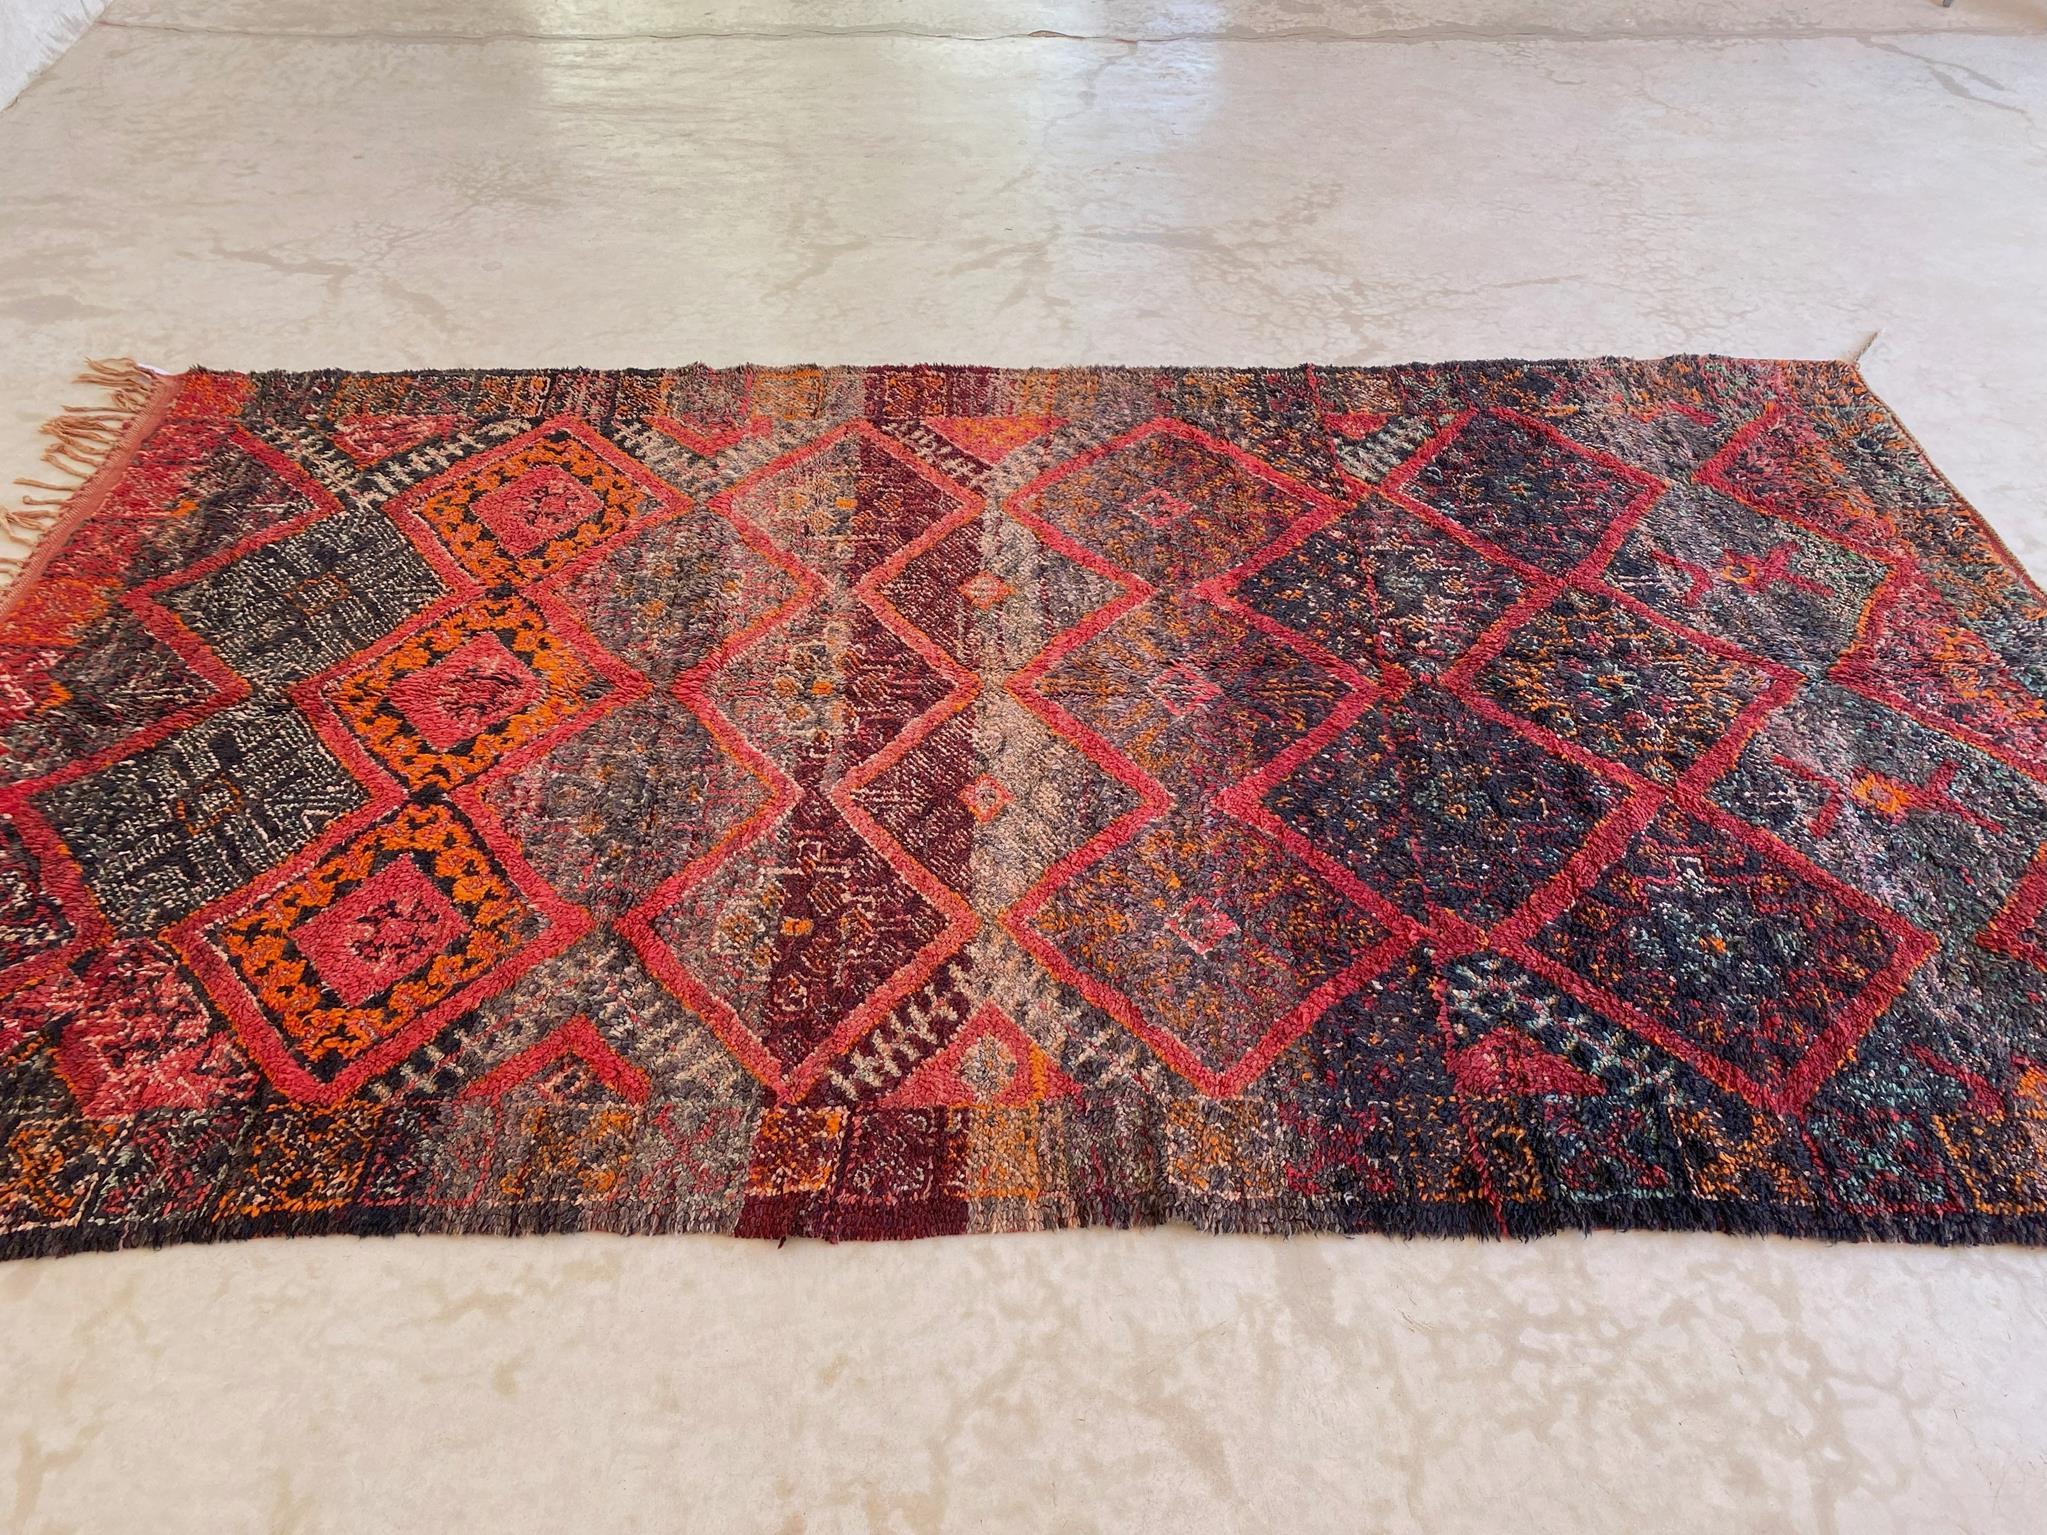 Hand-Woven Vintage Moroccan Beni Mguild rug - Black/red - 6x10.8feet / 183x331cm For Sale